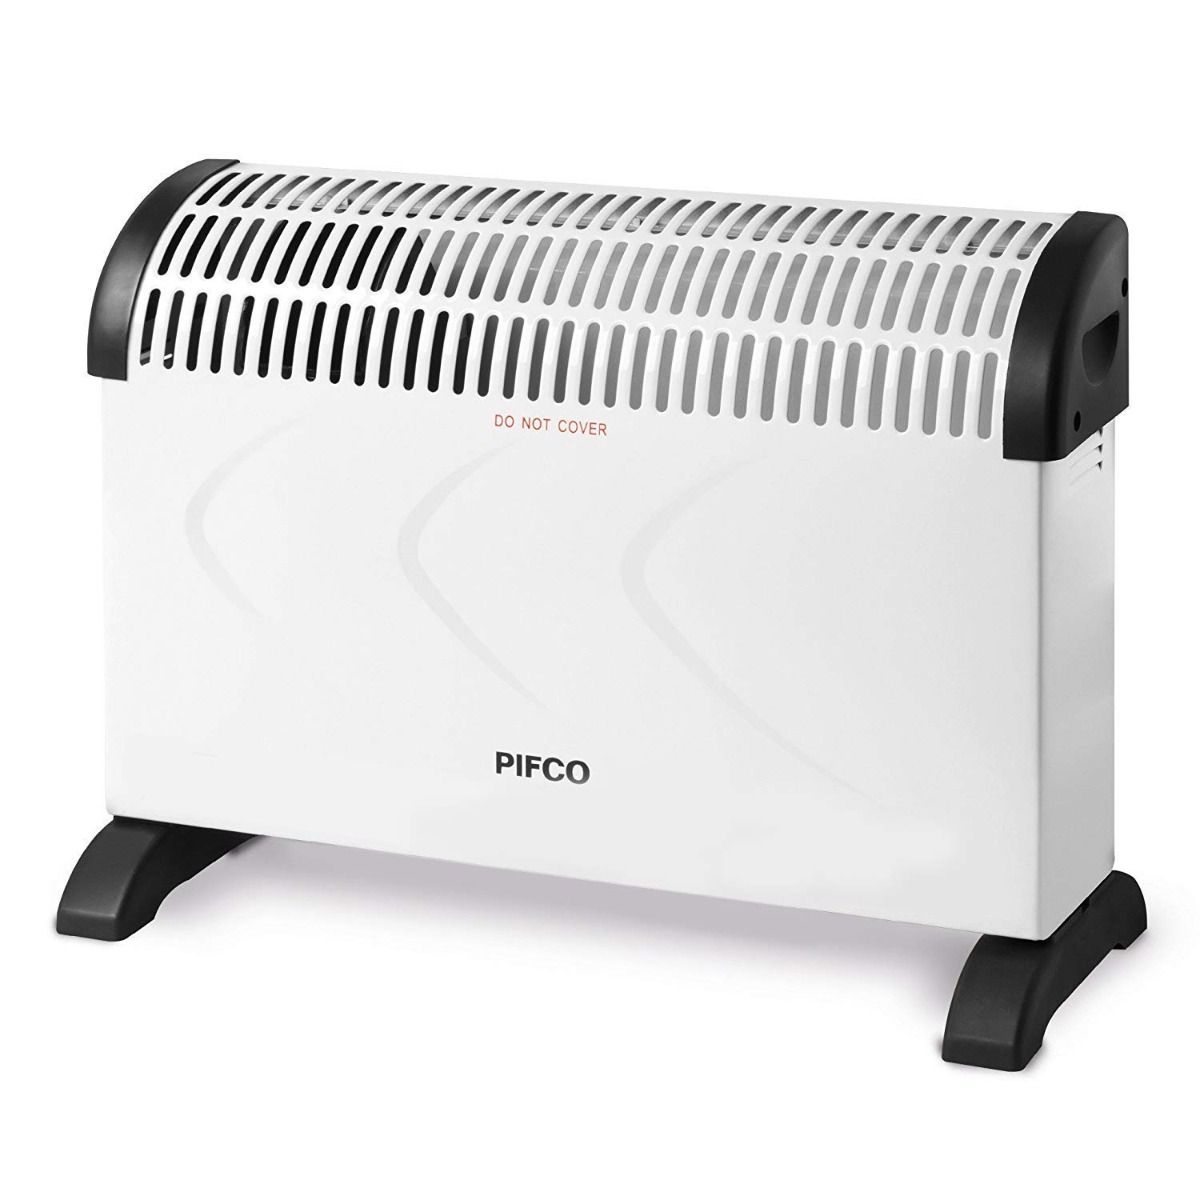 Pifco Convector Heater